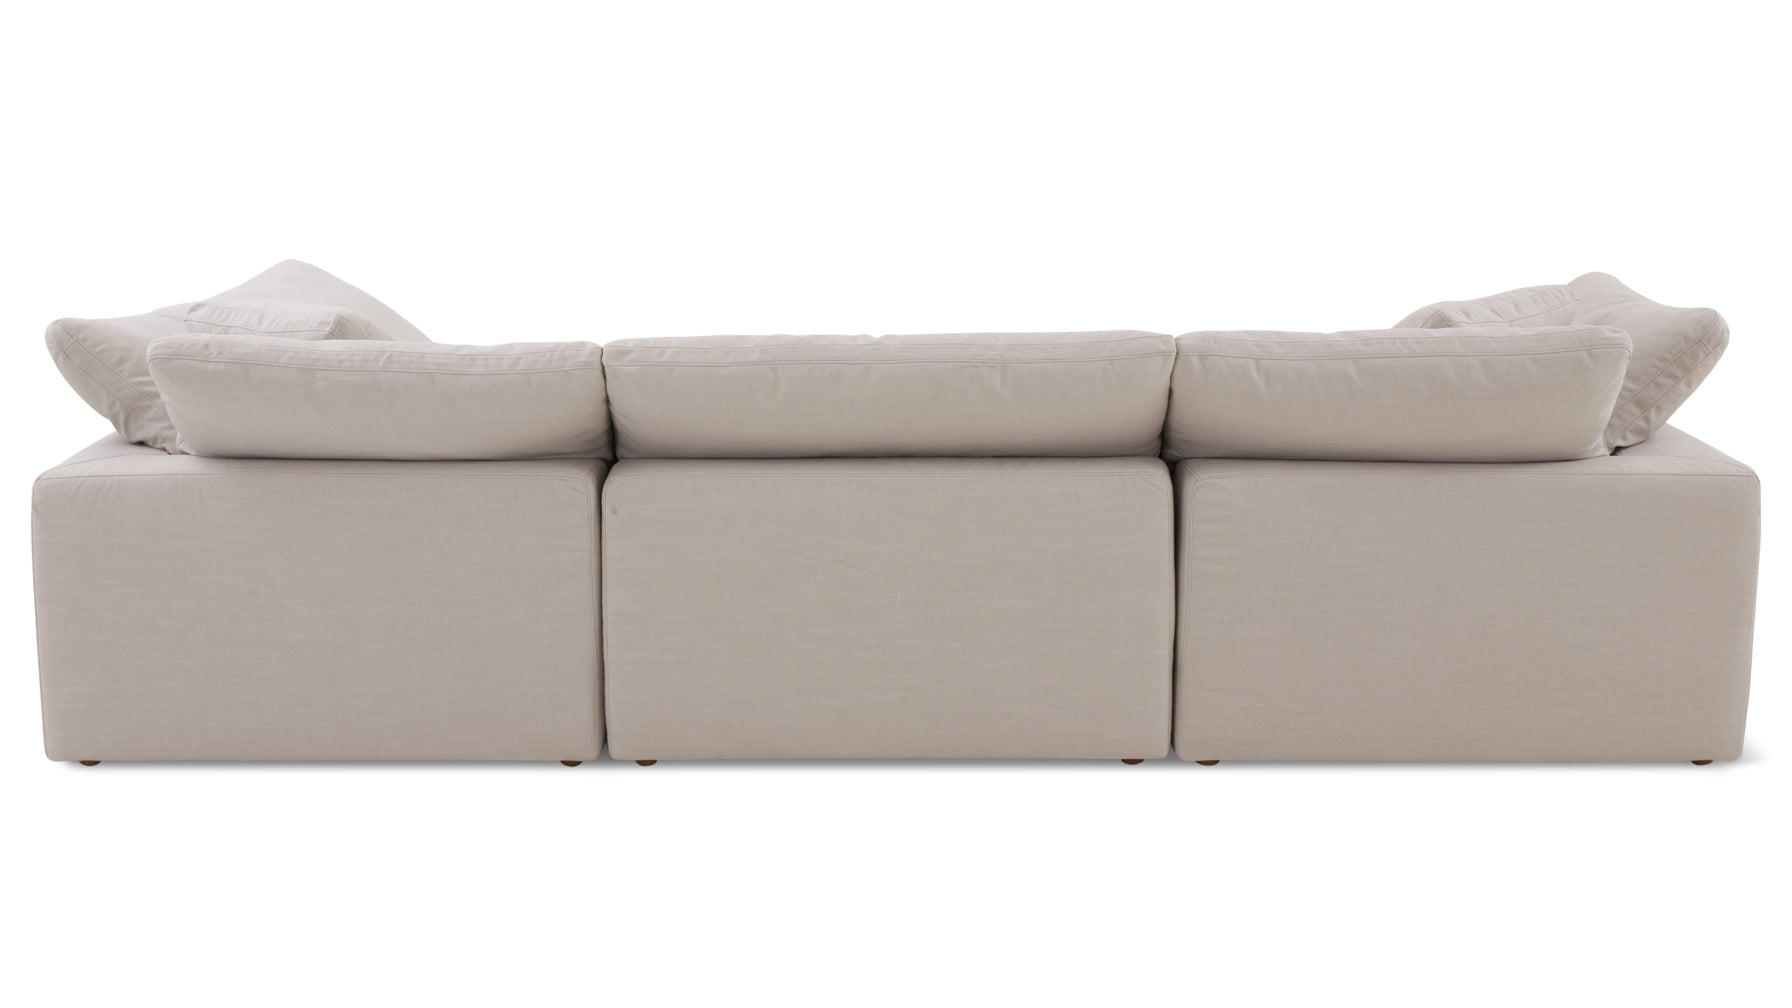 Movie Night™ 4-Piece Modular Sectional, Large, Clay - Image 9